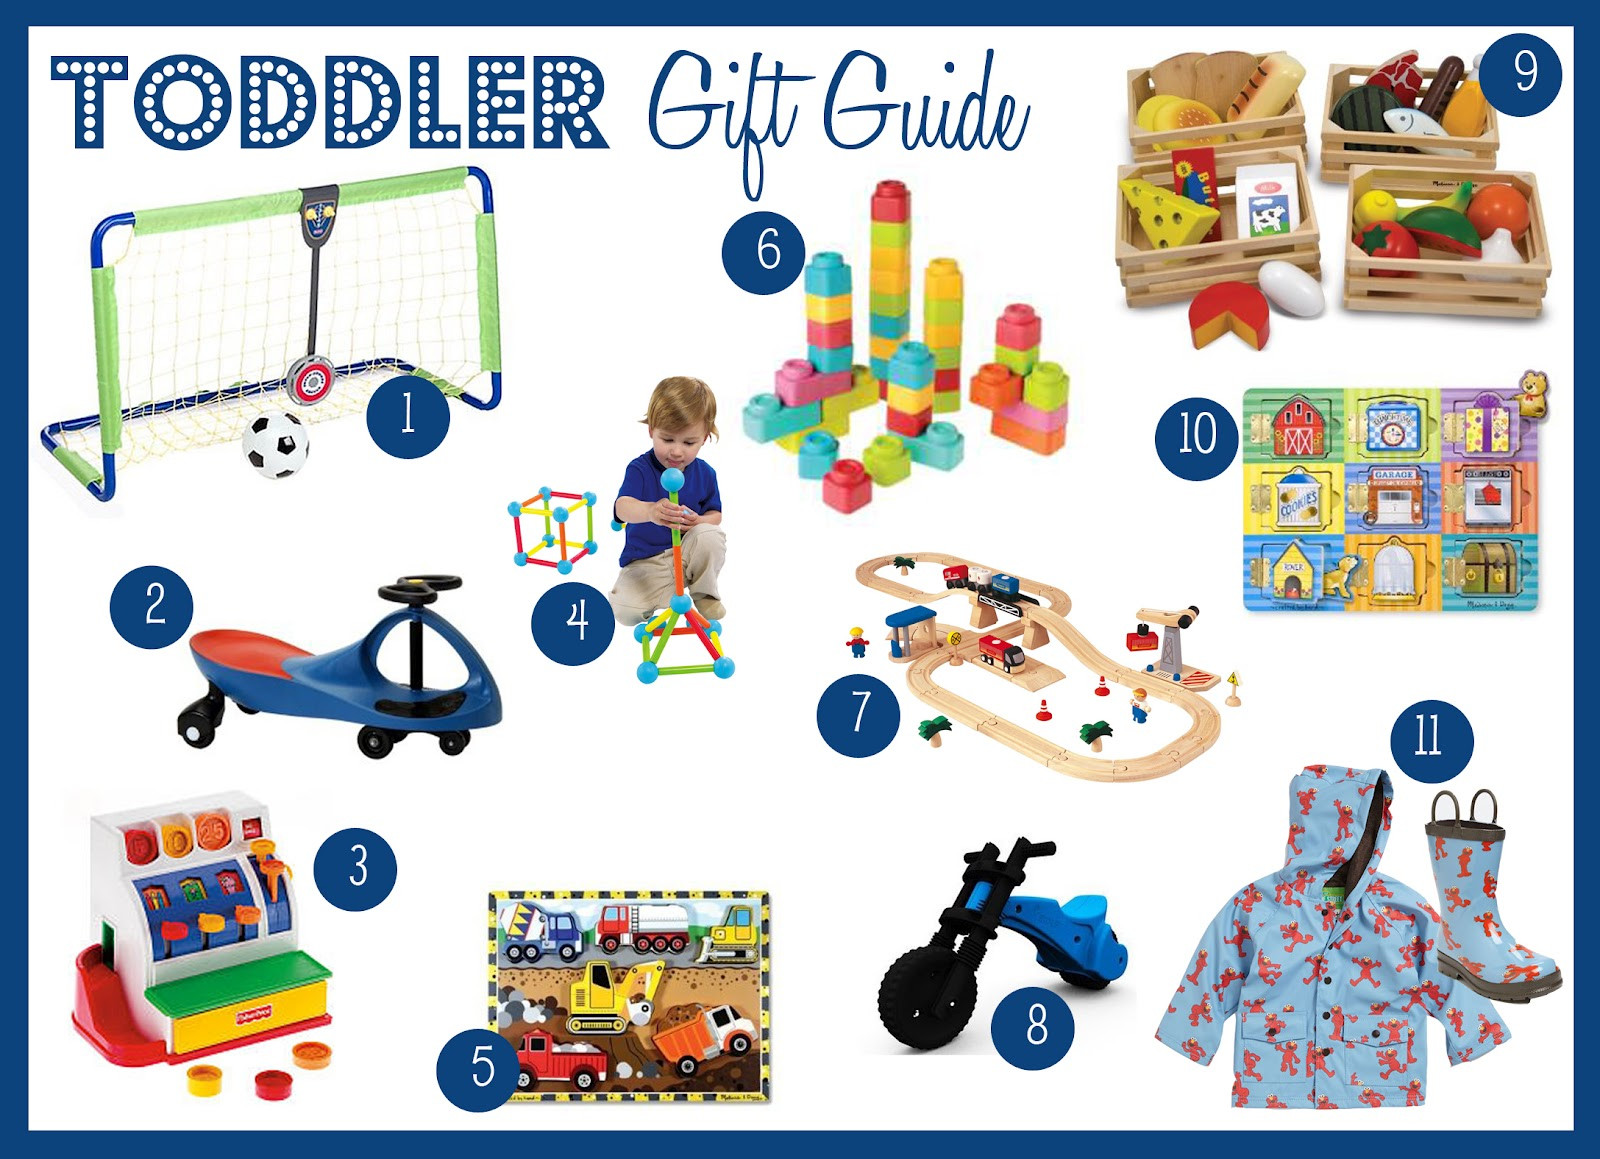 Toddler Gift Ideas For Boys
 Daily Dimples Toddler Gift Guide